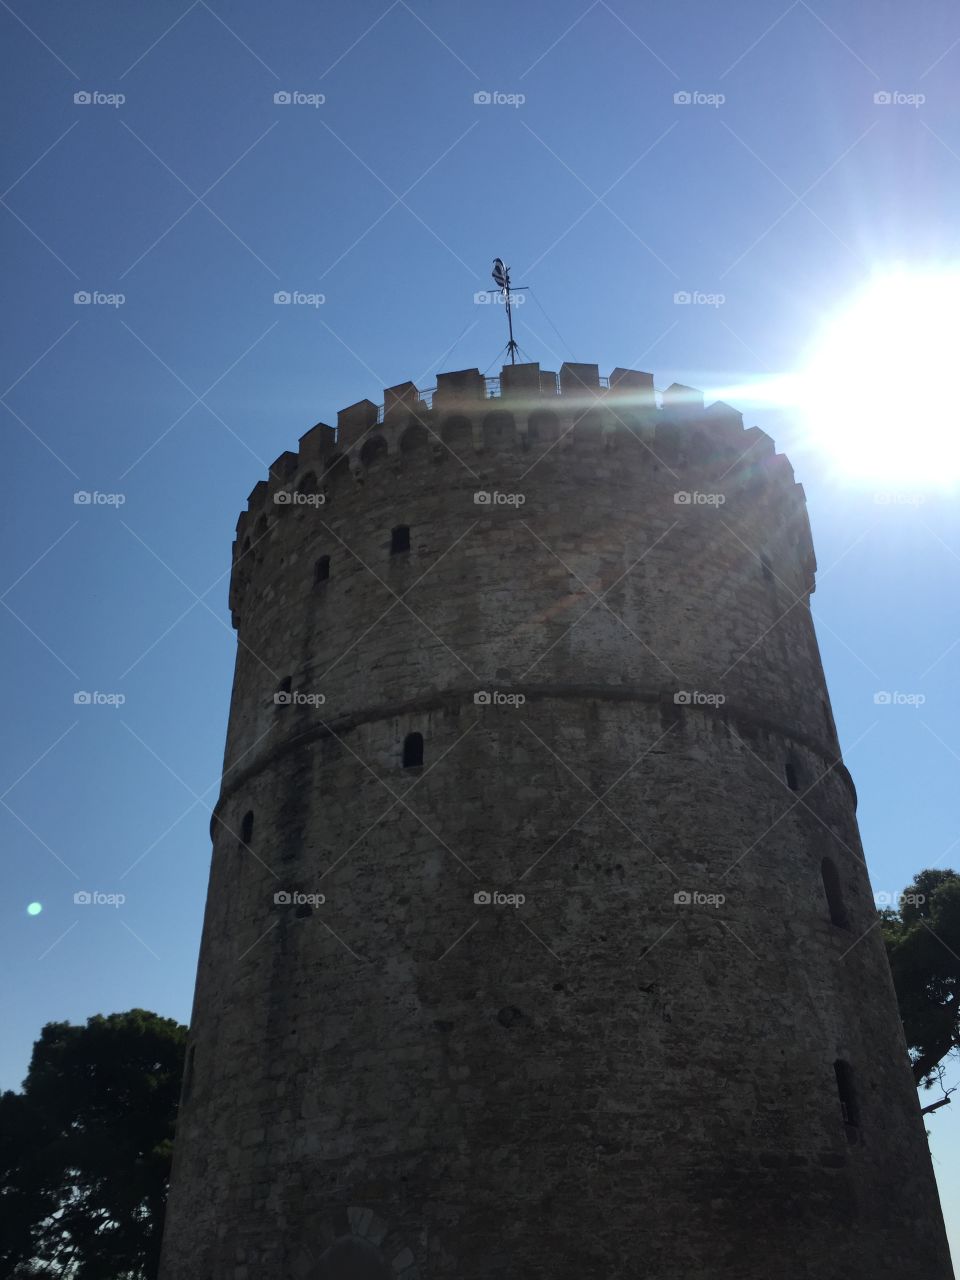 Architecture, Castle, No Person, Tower, Fortification